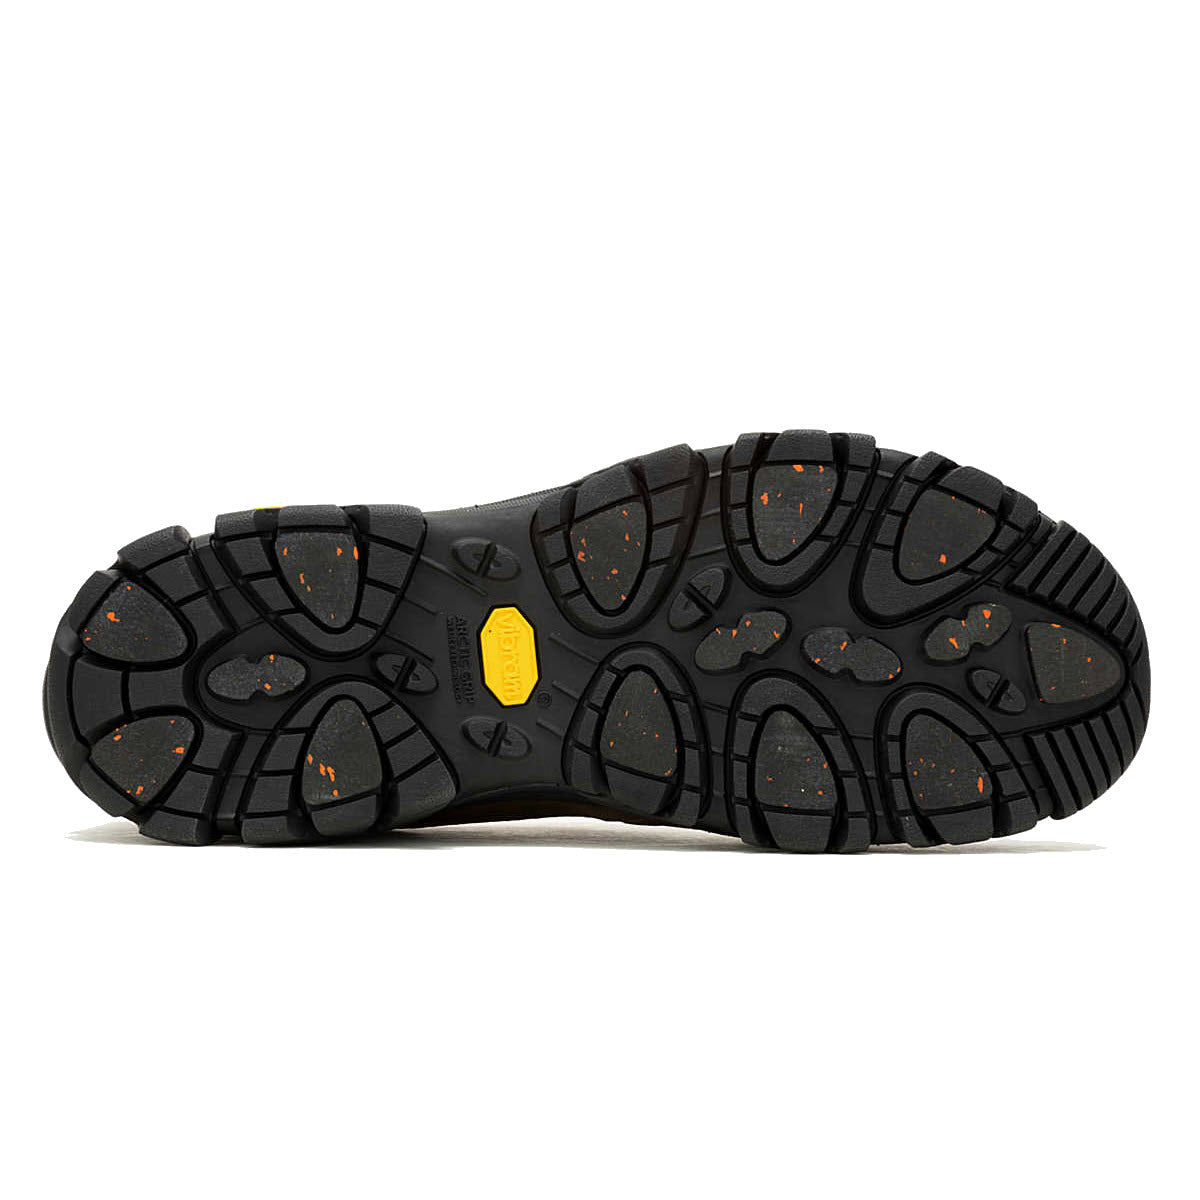 Black rubber sole of a shoe with yellow Merrell logo and speckled details, featuring waterproof construction.